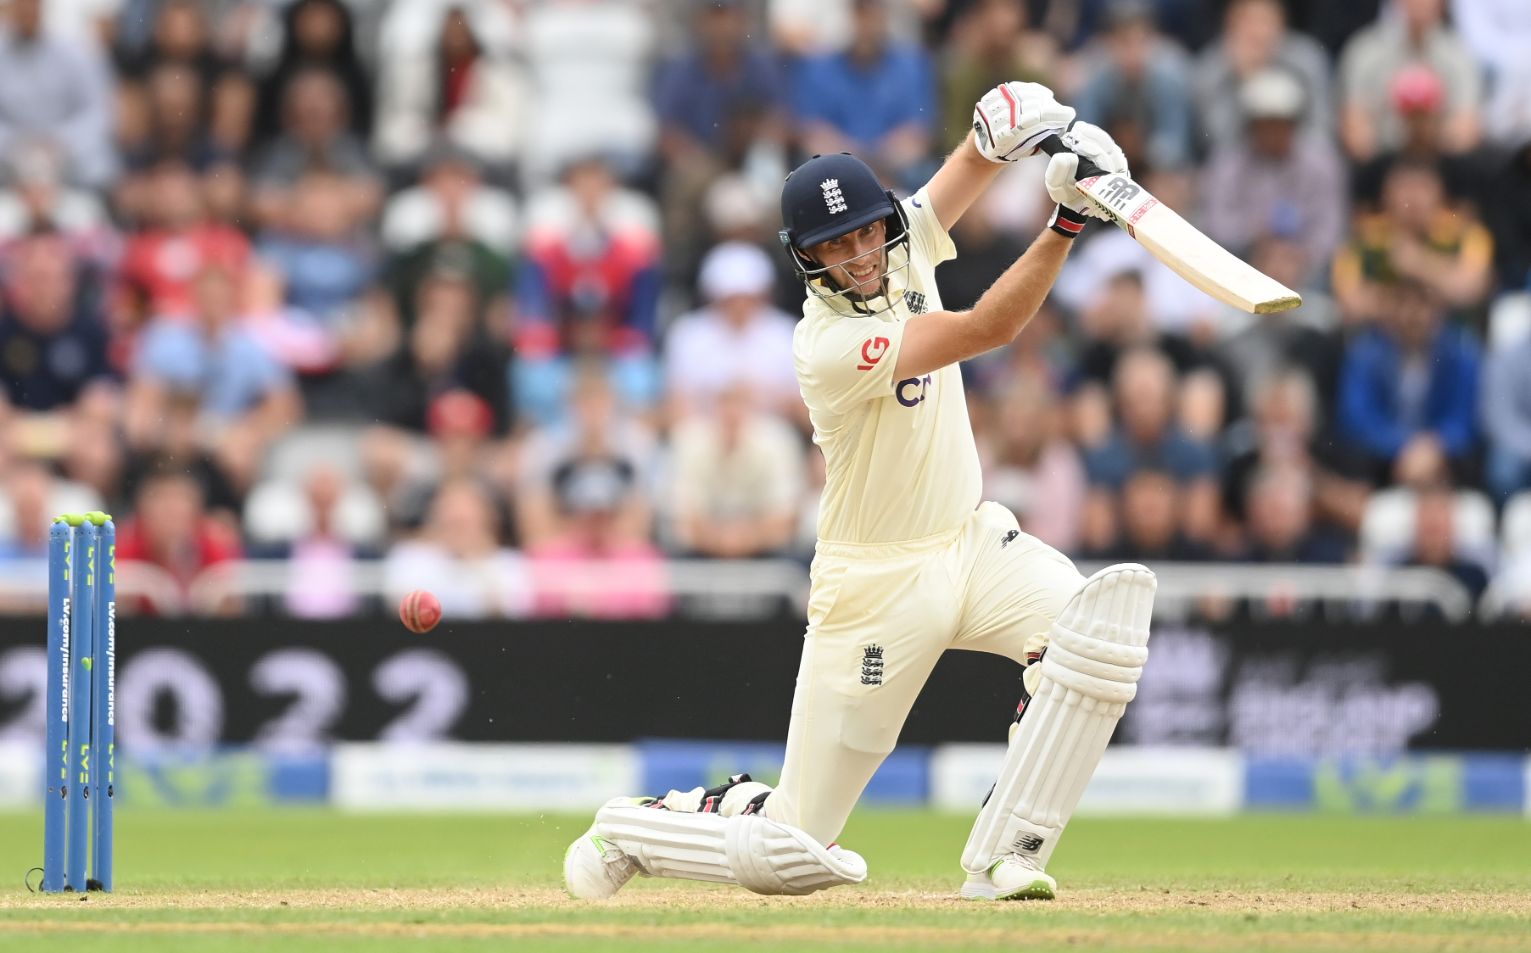 ENG vs IND | Lord's Test: Joe Root hits back-to-back hundred to lead England's charge